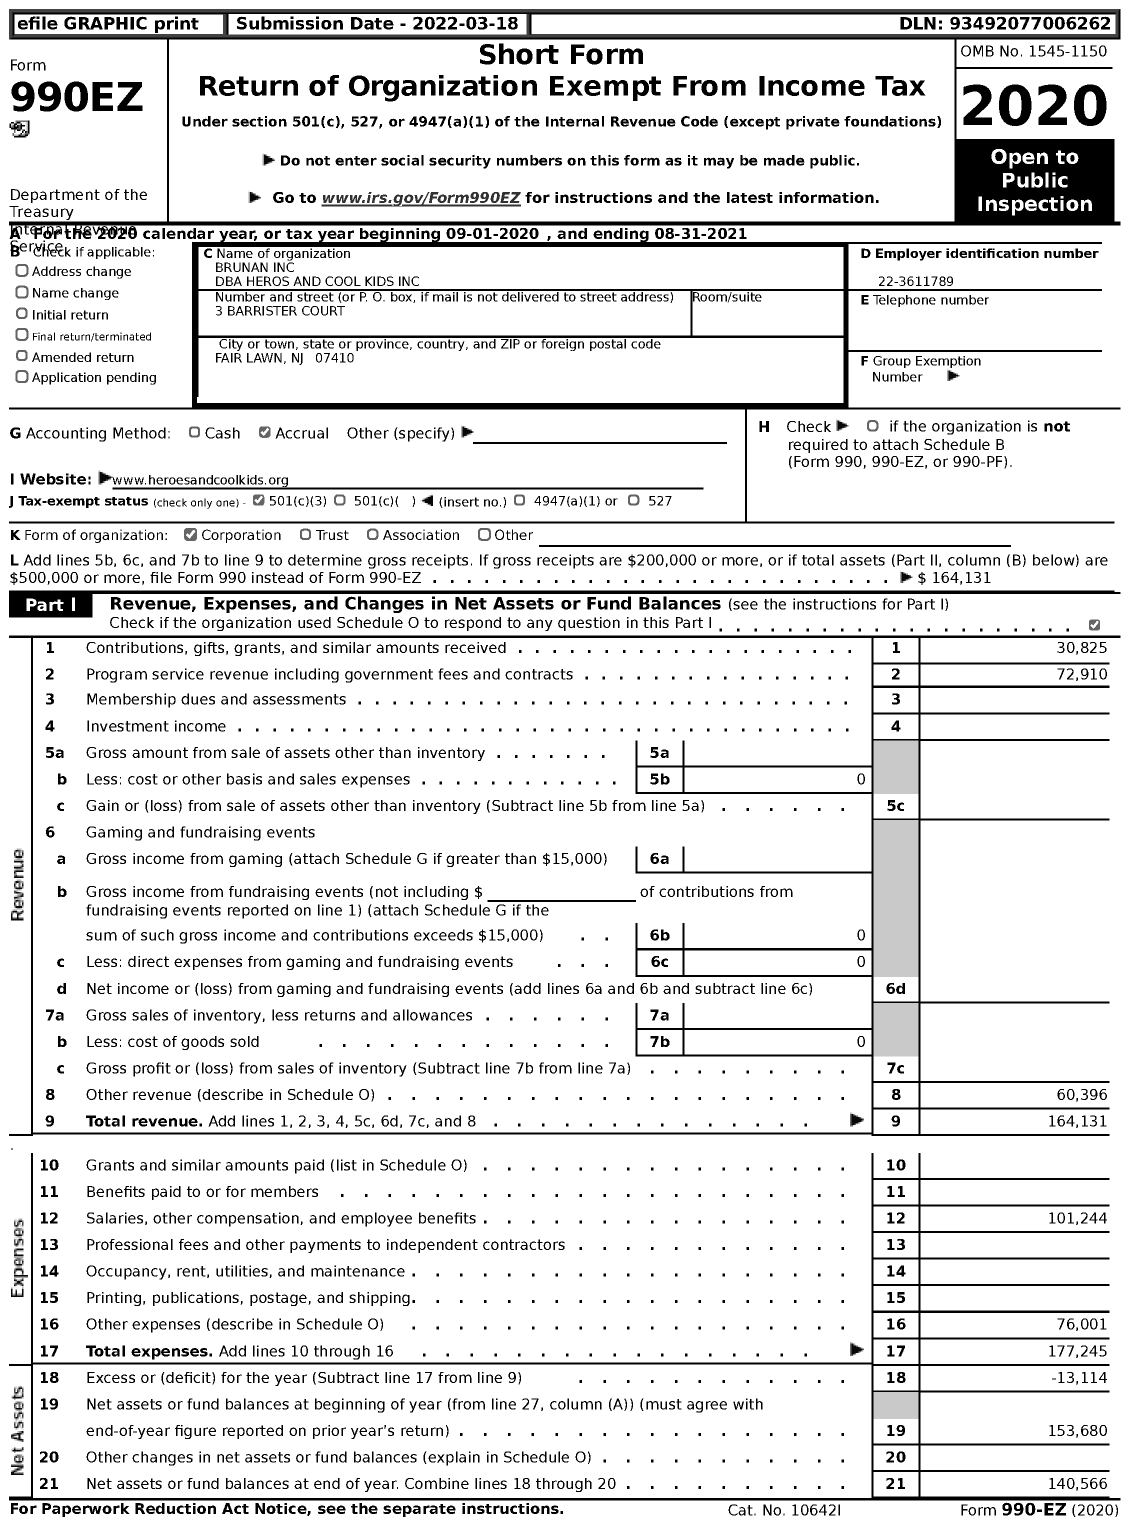 Image of first page of 2020 Form 990EZ for Heros and Cool Kids